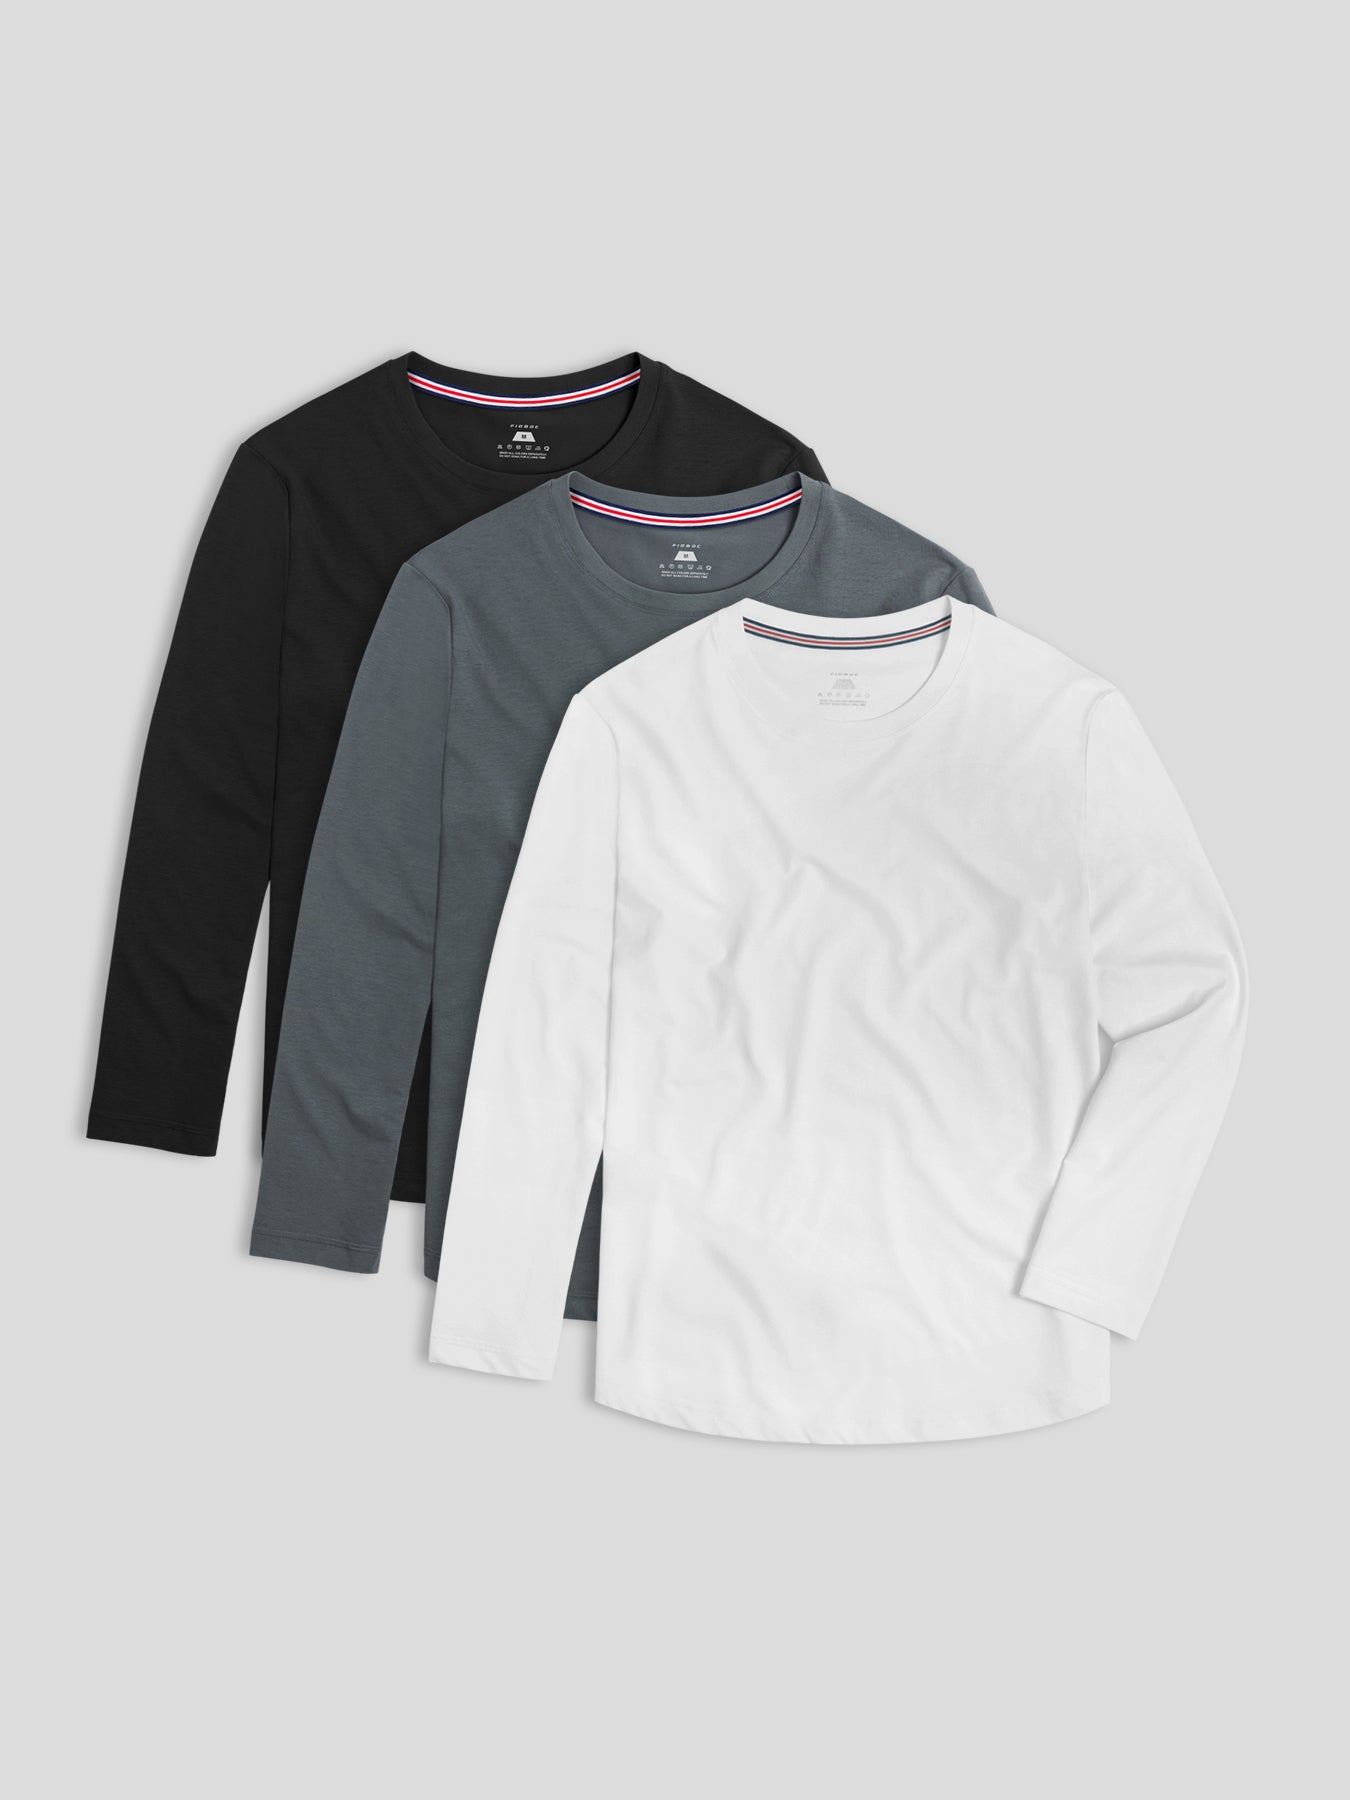 StaySmooth Long Sleeve Tee Multicolor 3-Pack: Classic Fit